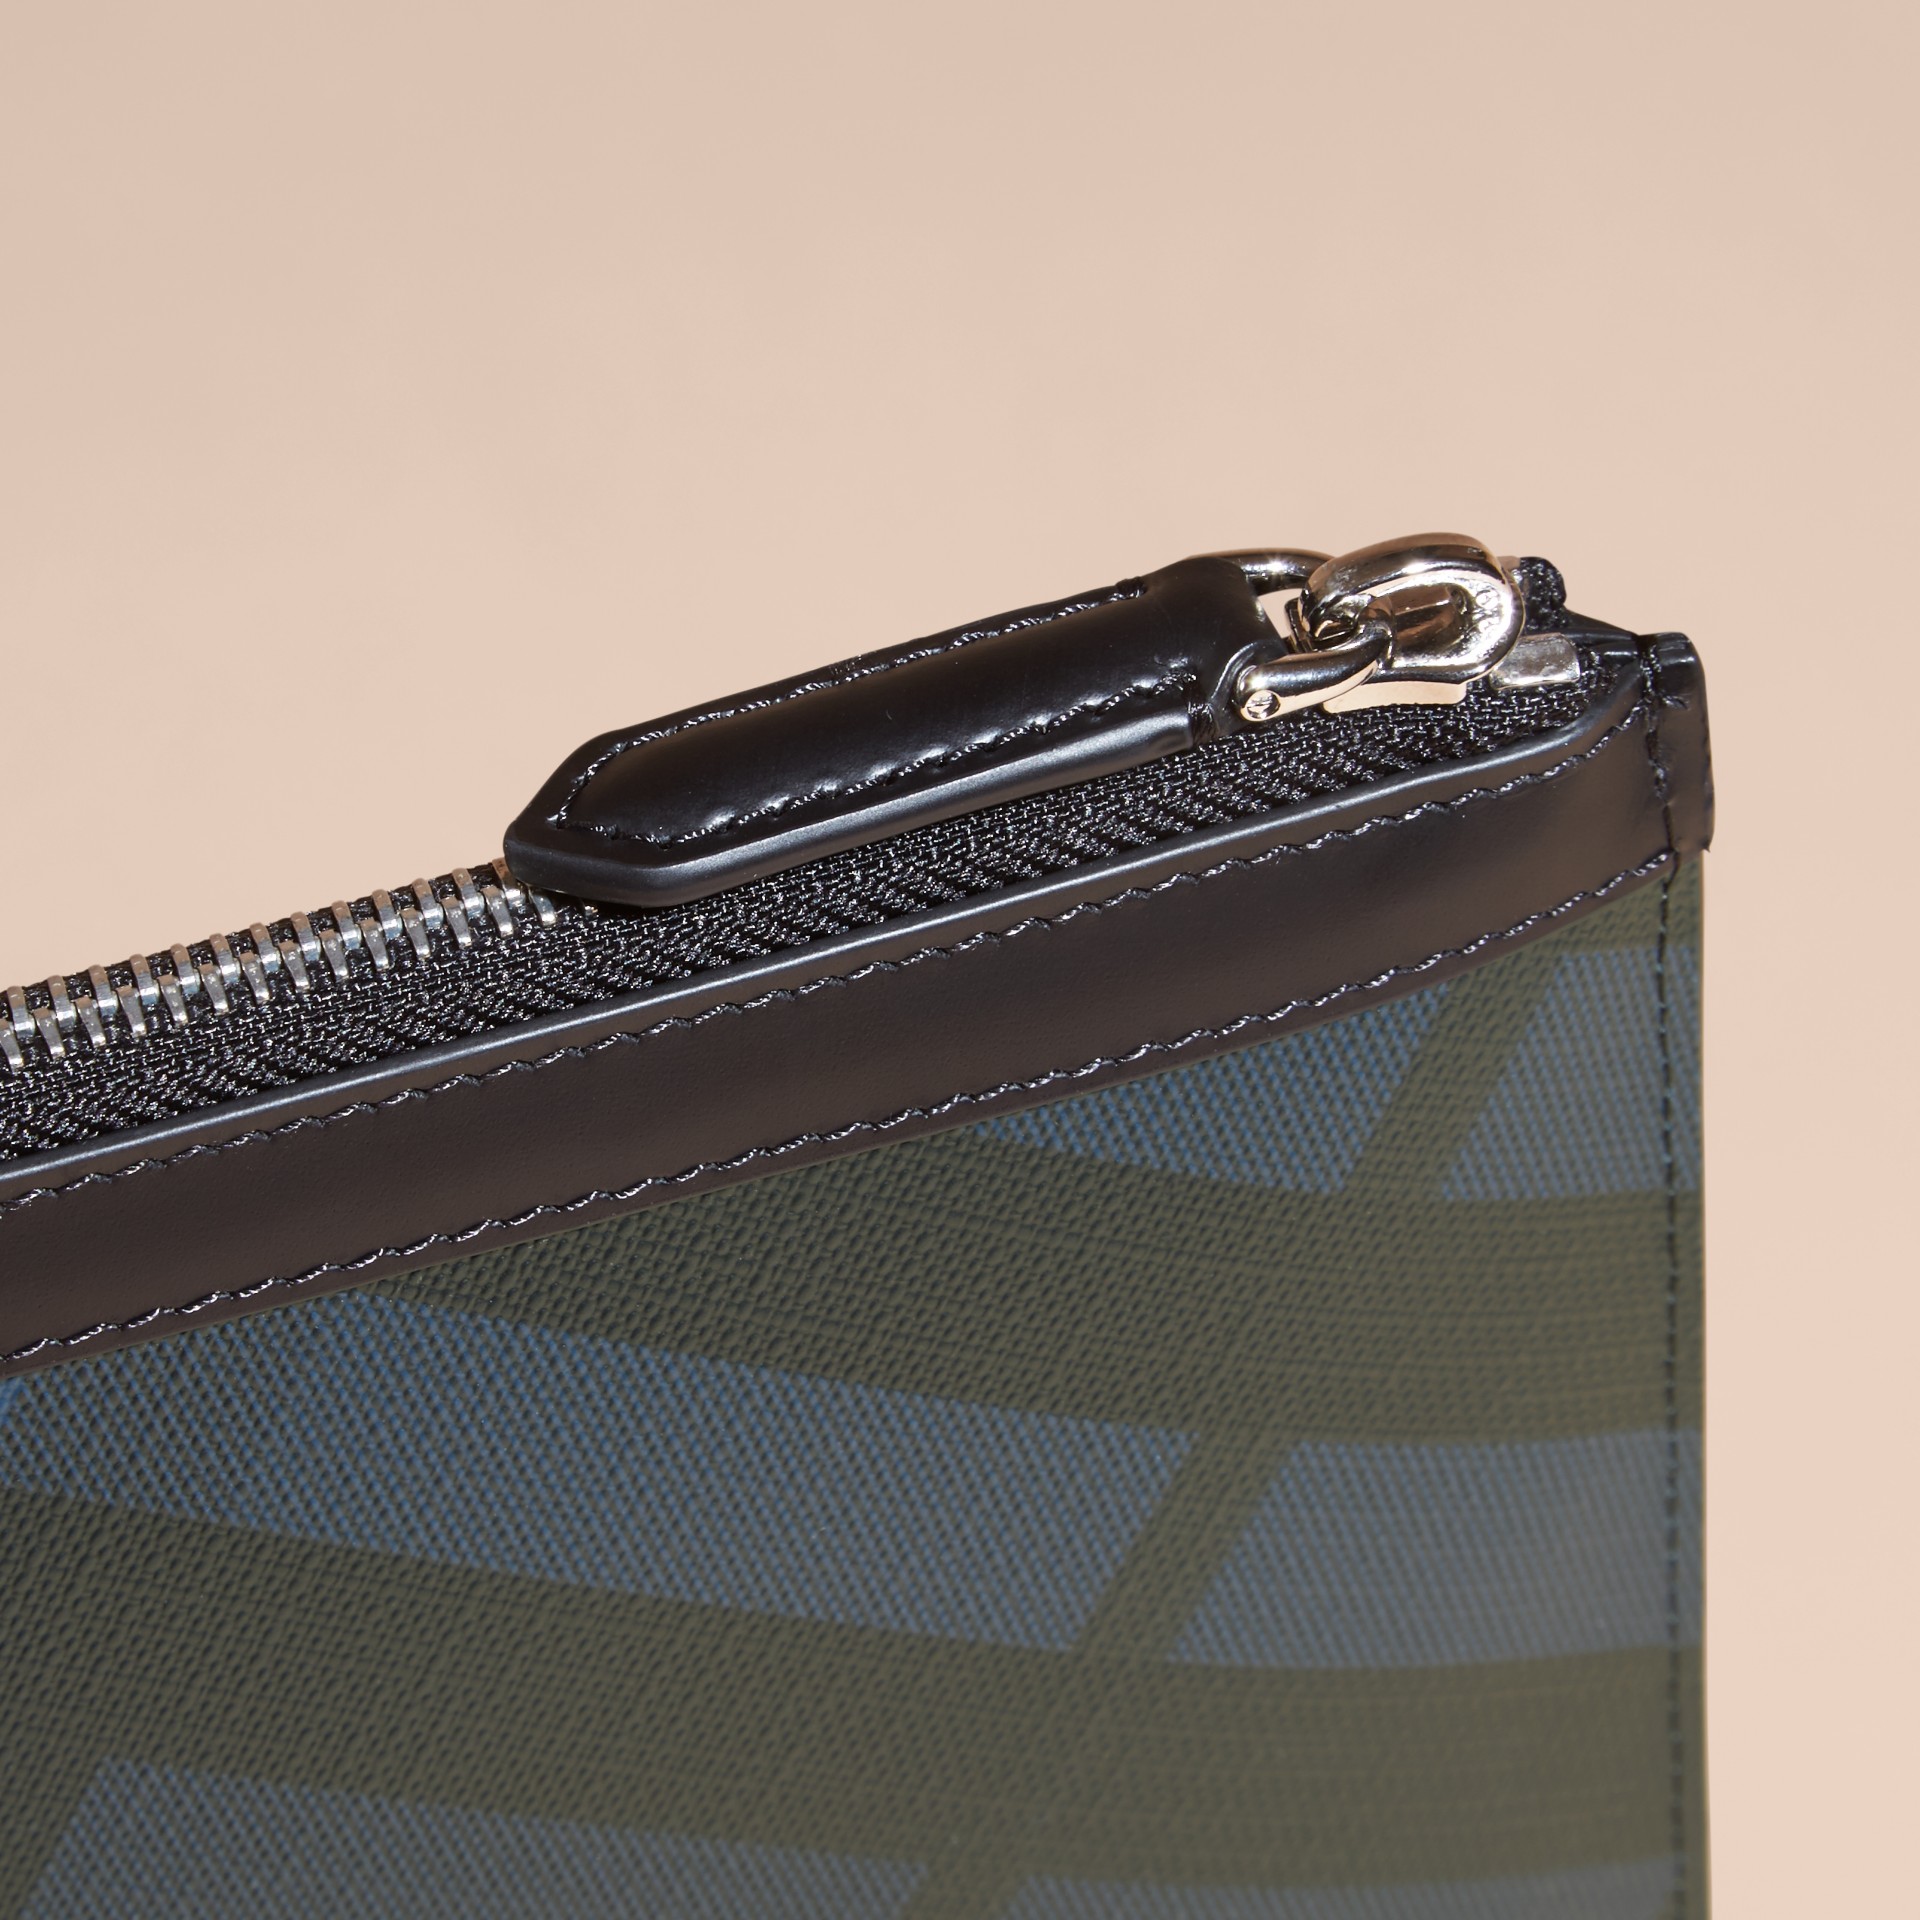 Zipped London Check Pouch in Navy/black - Men | Burberry